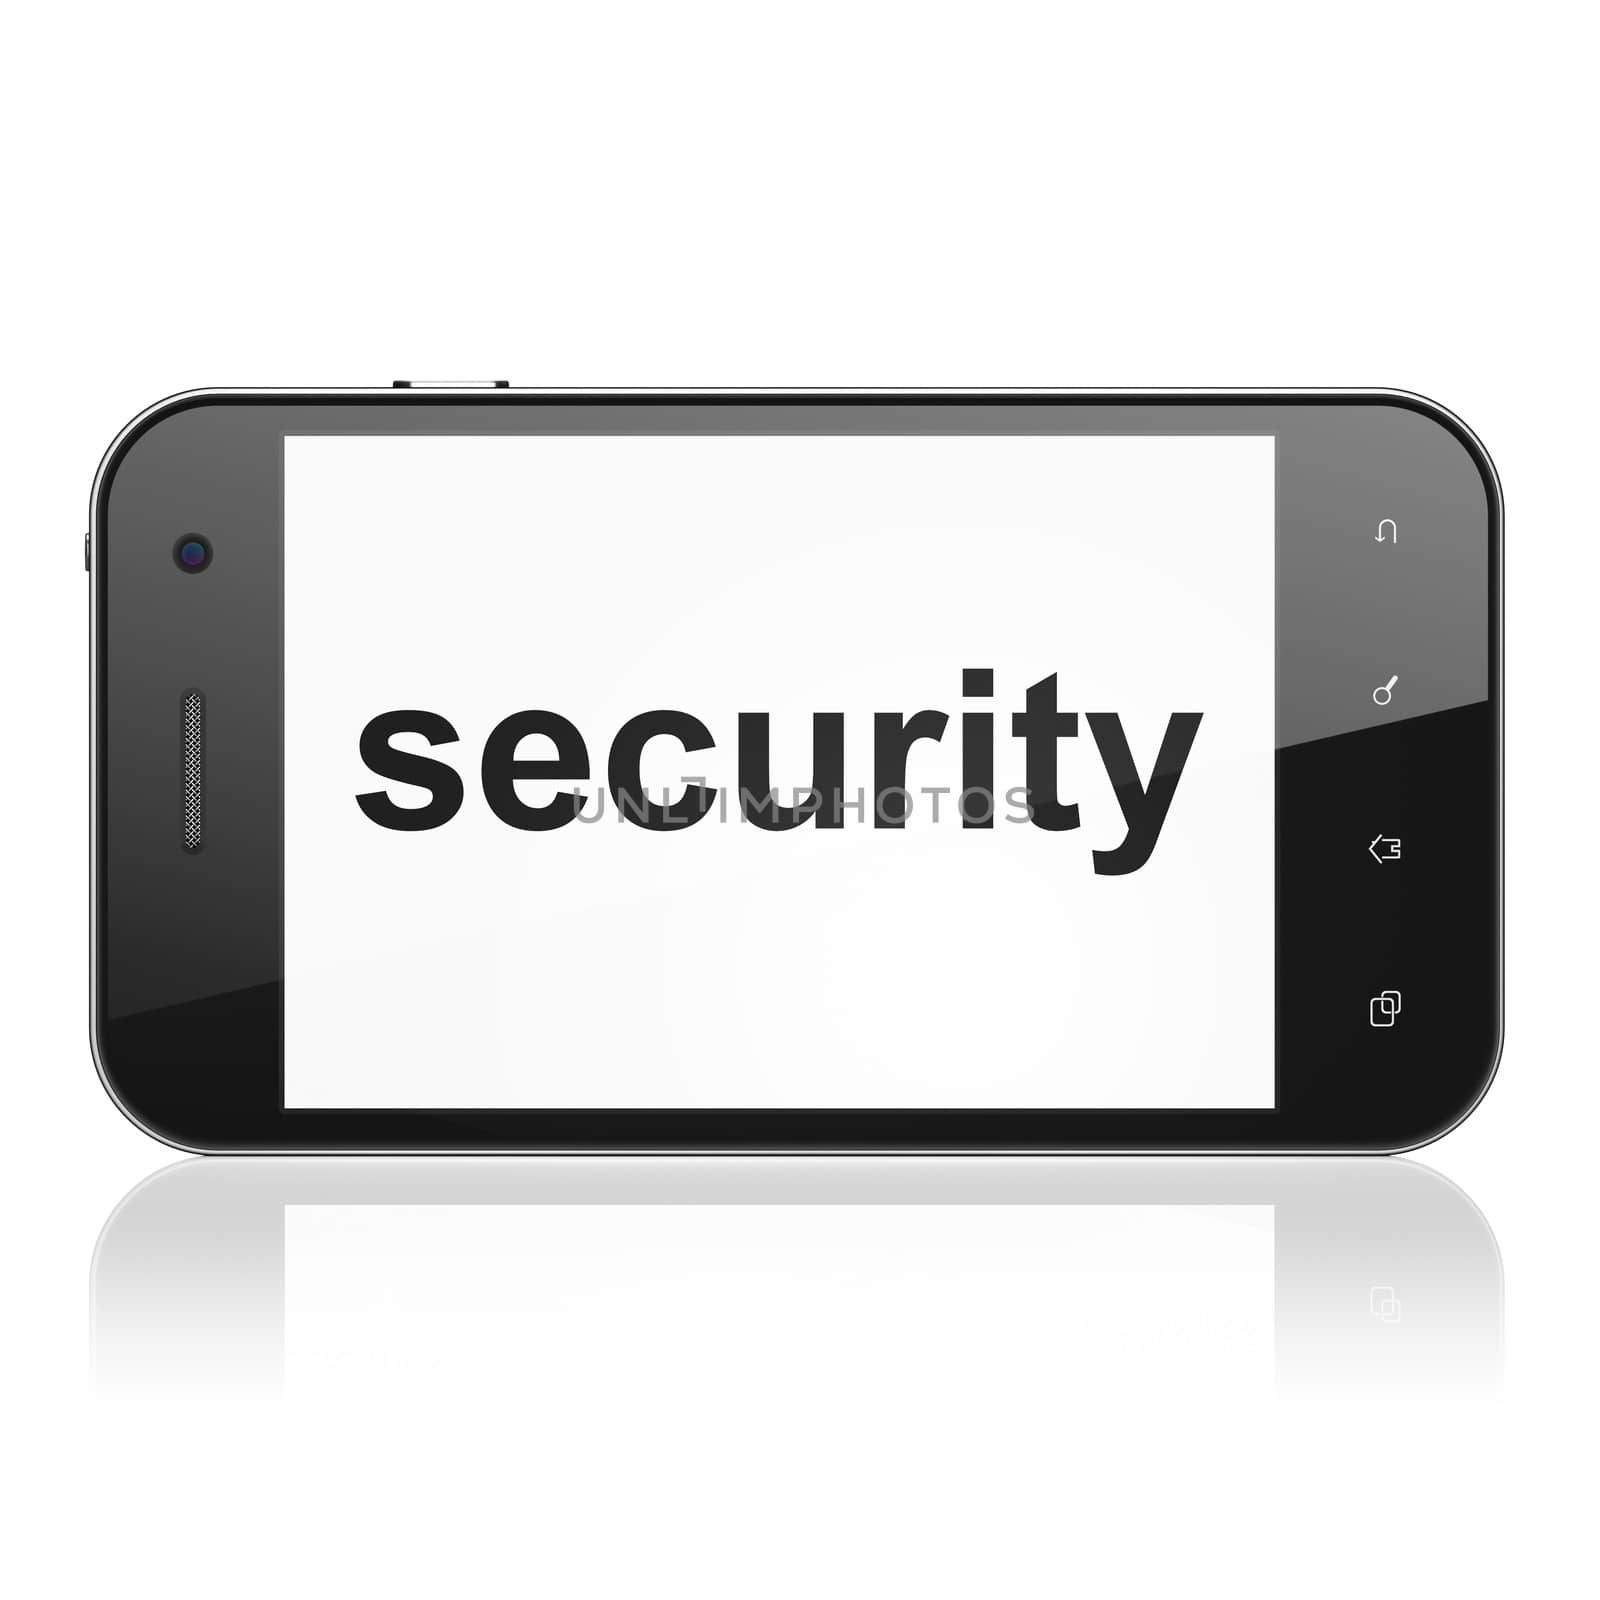 Safety concept: Security on smartphone by maxkabakov